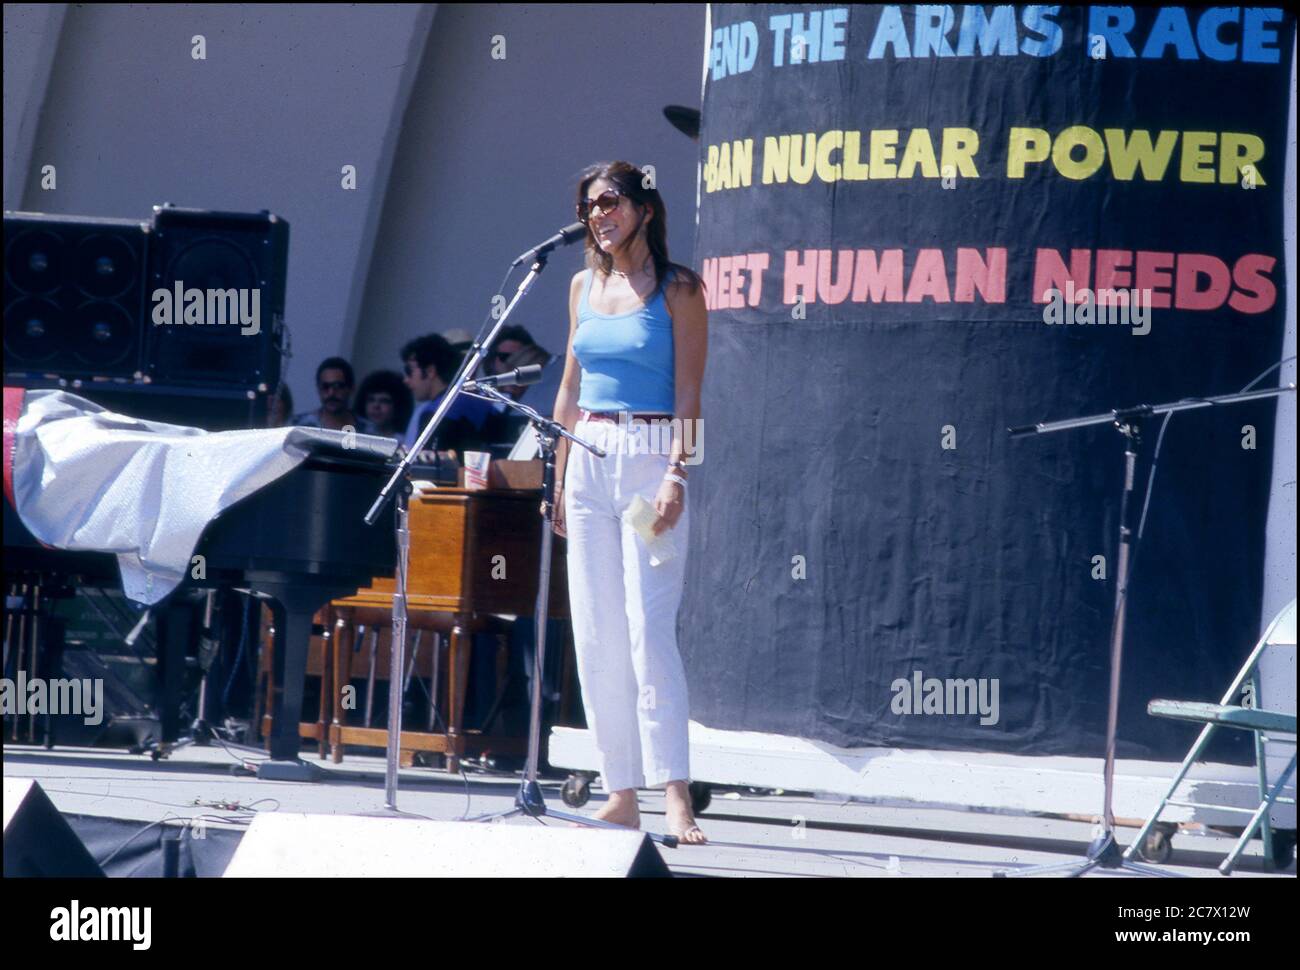 Patti Davis the daughter of Ronald and Nancy Reagan appears at a concert protesting nuclear power at the Hollywood Bowl Stock Photo